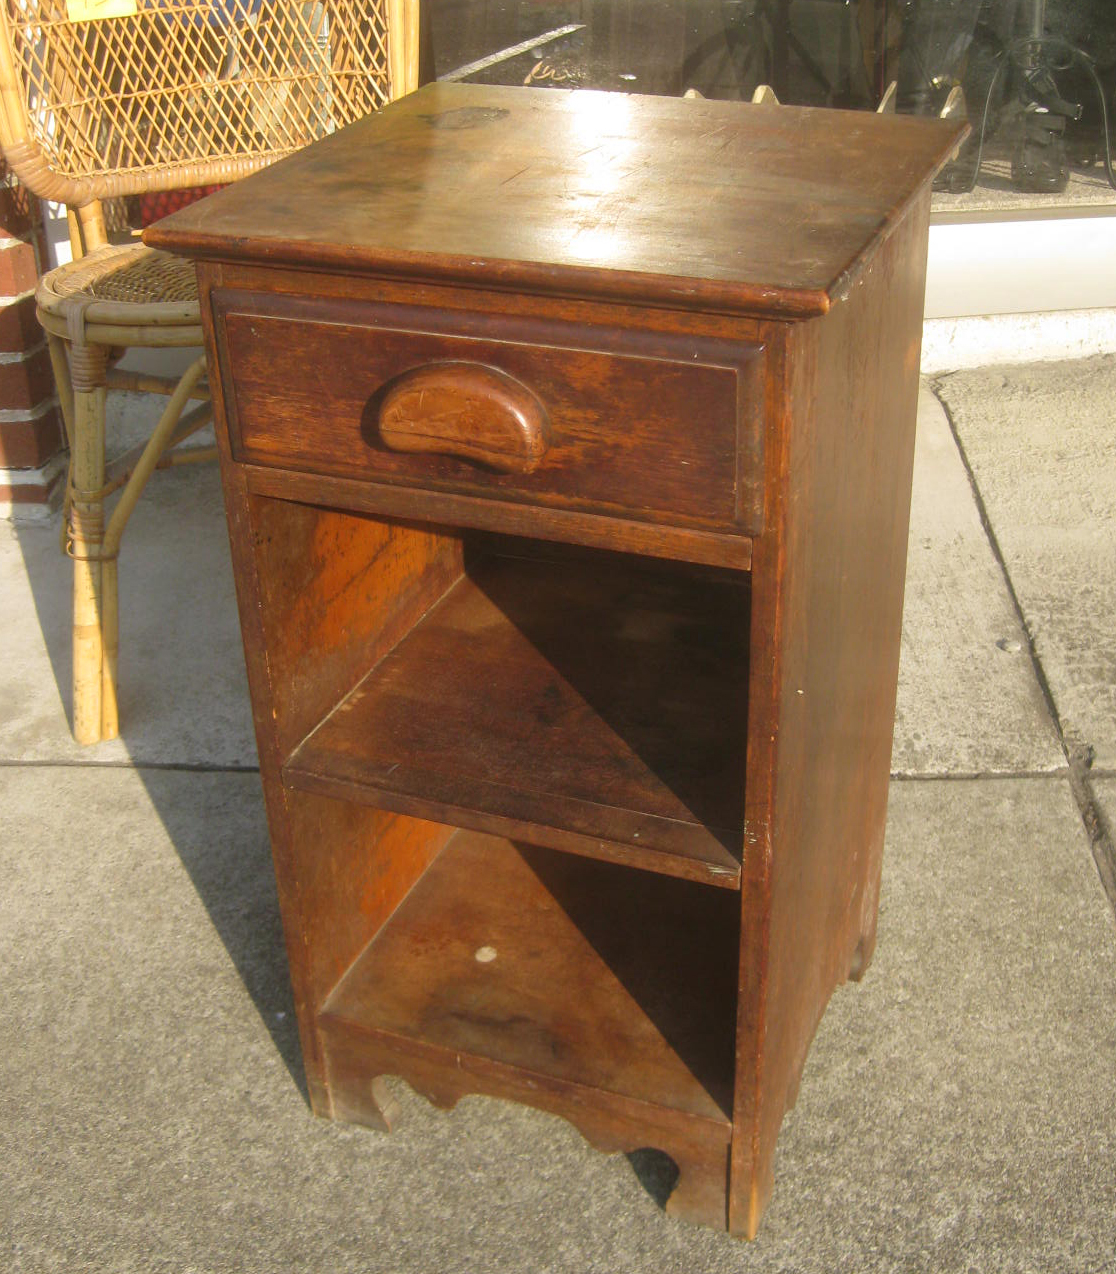 UHURU FURNITURE & COLLECTIBLES: SOLD - Wooden Night Stand - $35